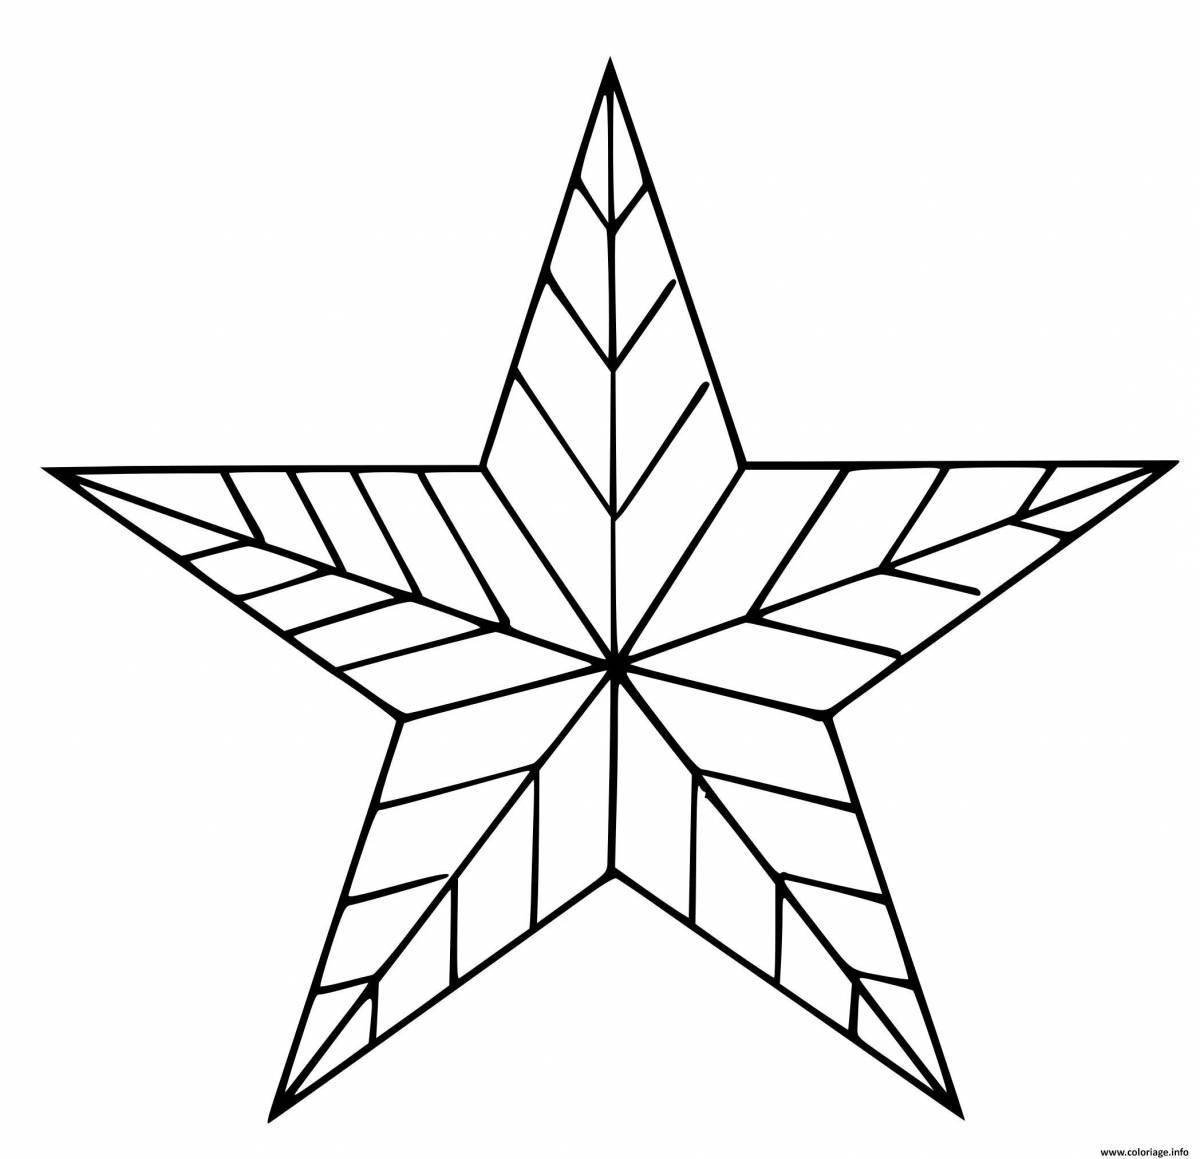 Coloring book festive Christmas star